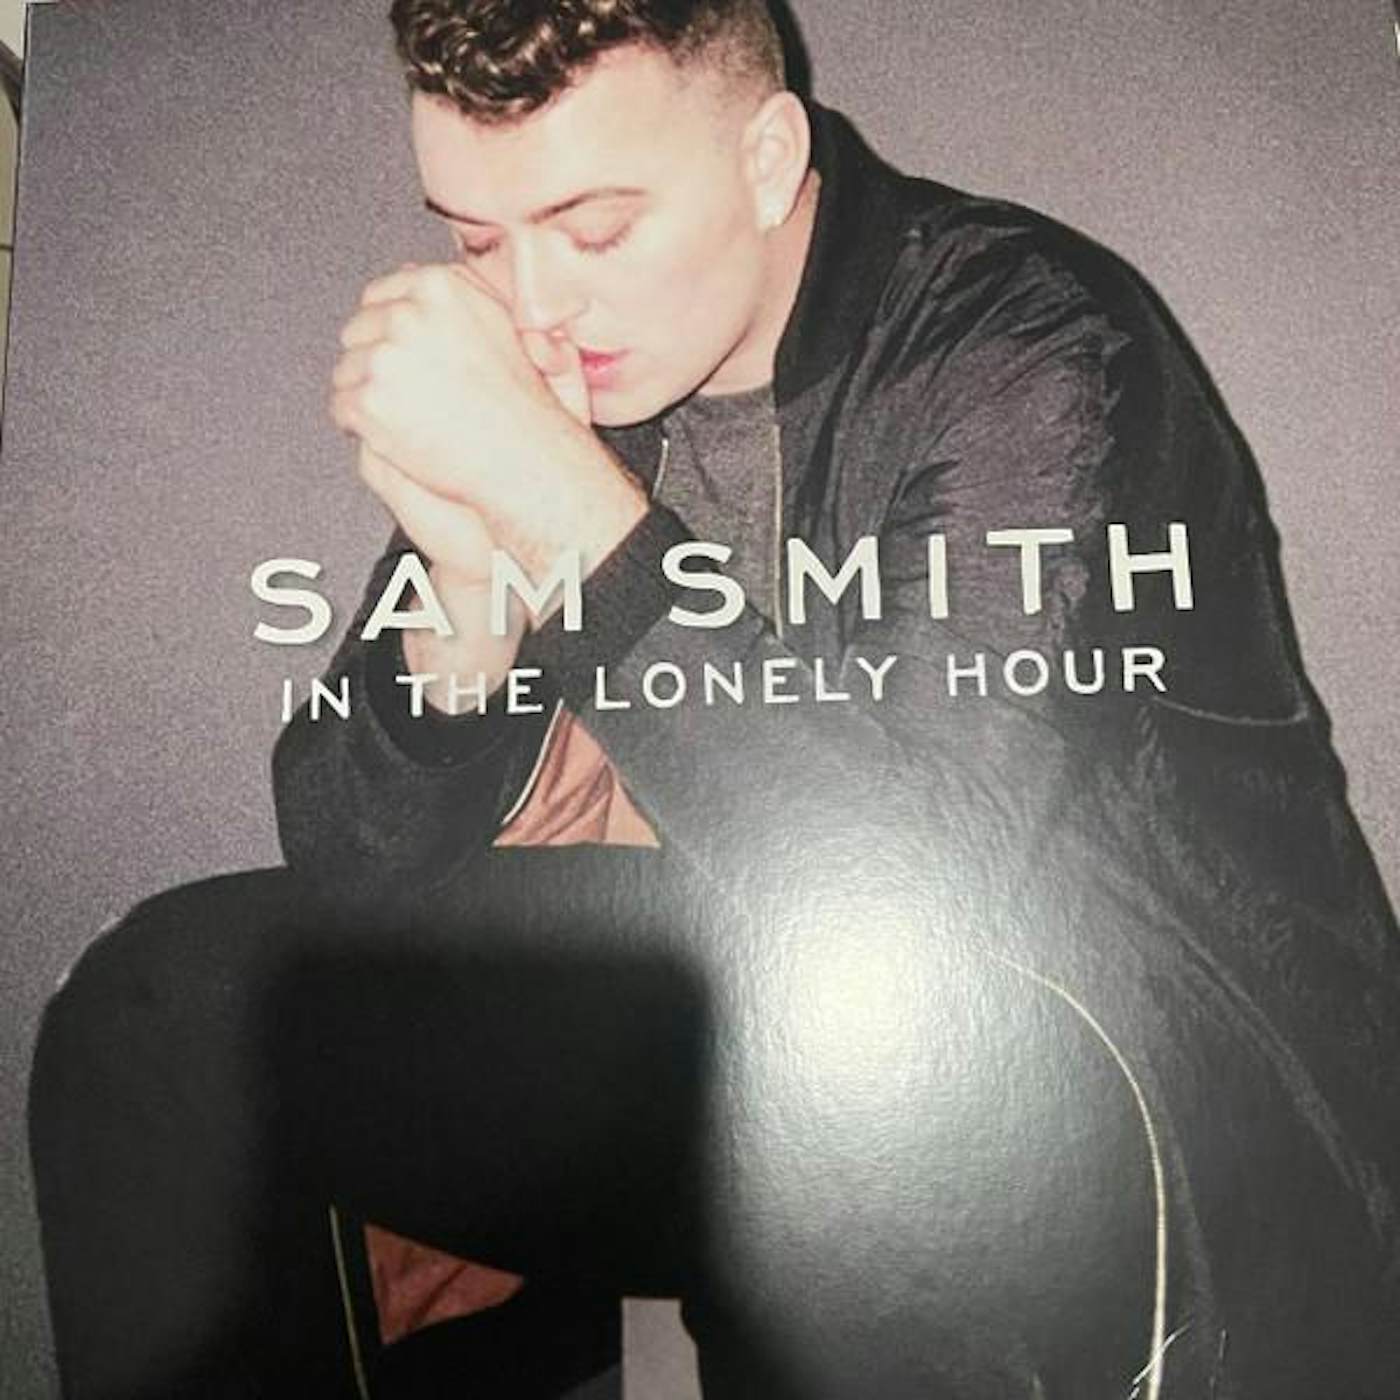 Sam Smith IN THE LONELY HOUR Vinyl Record